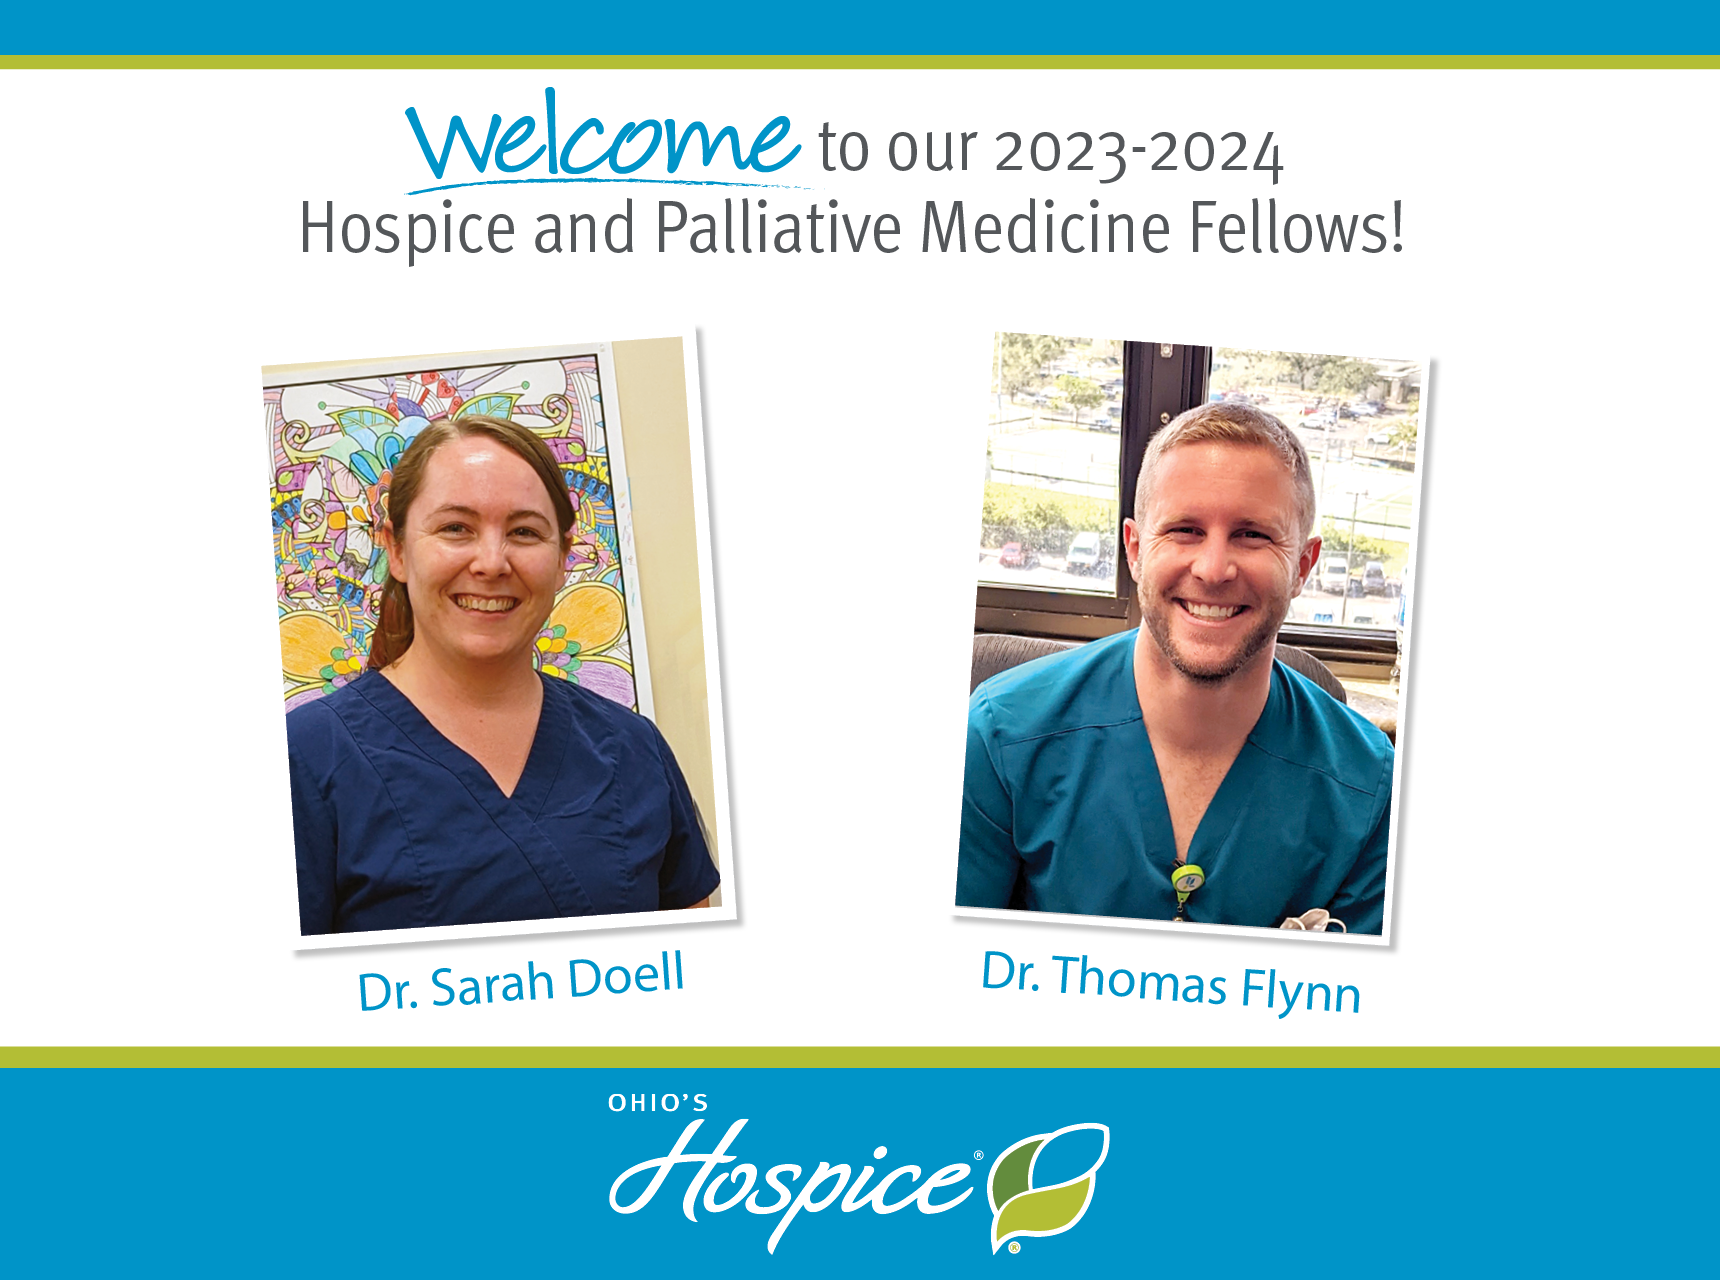 Welcome to our 2023-2024 Hospice and Palliative Medicine Fellows! Dr. Sarah Doell and Dr. Thomas Flynn. Ohio's Hospice